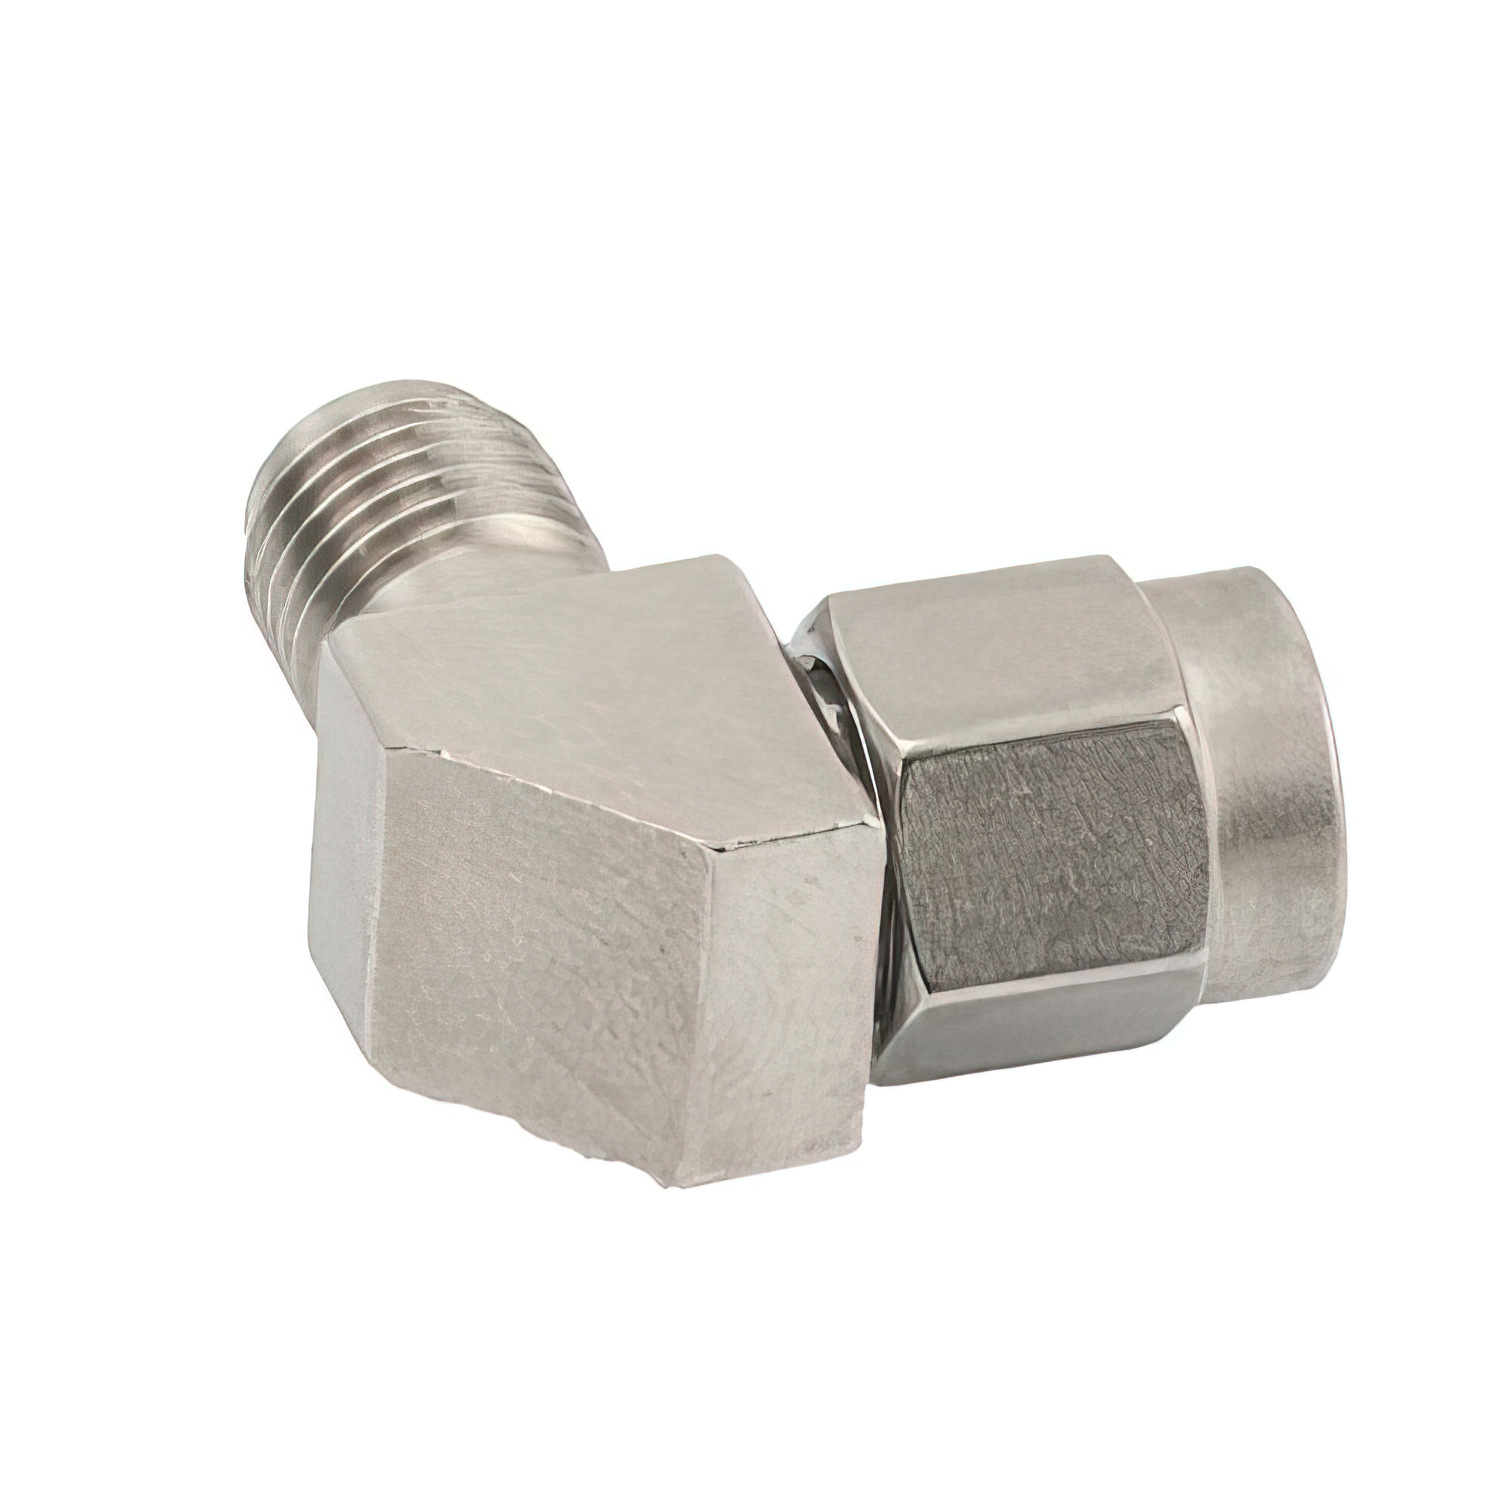 2.92mm Male to 2.92mm Female Miter Right Angle Adapter2